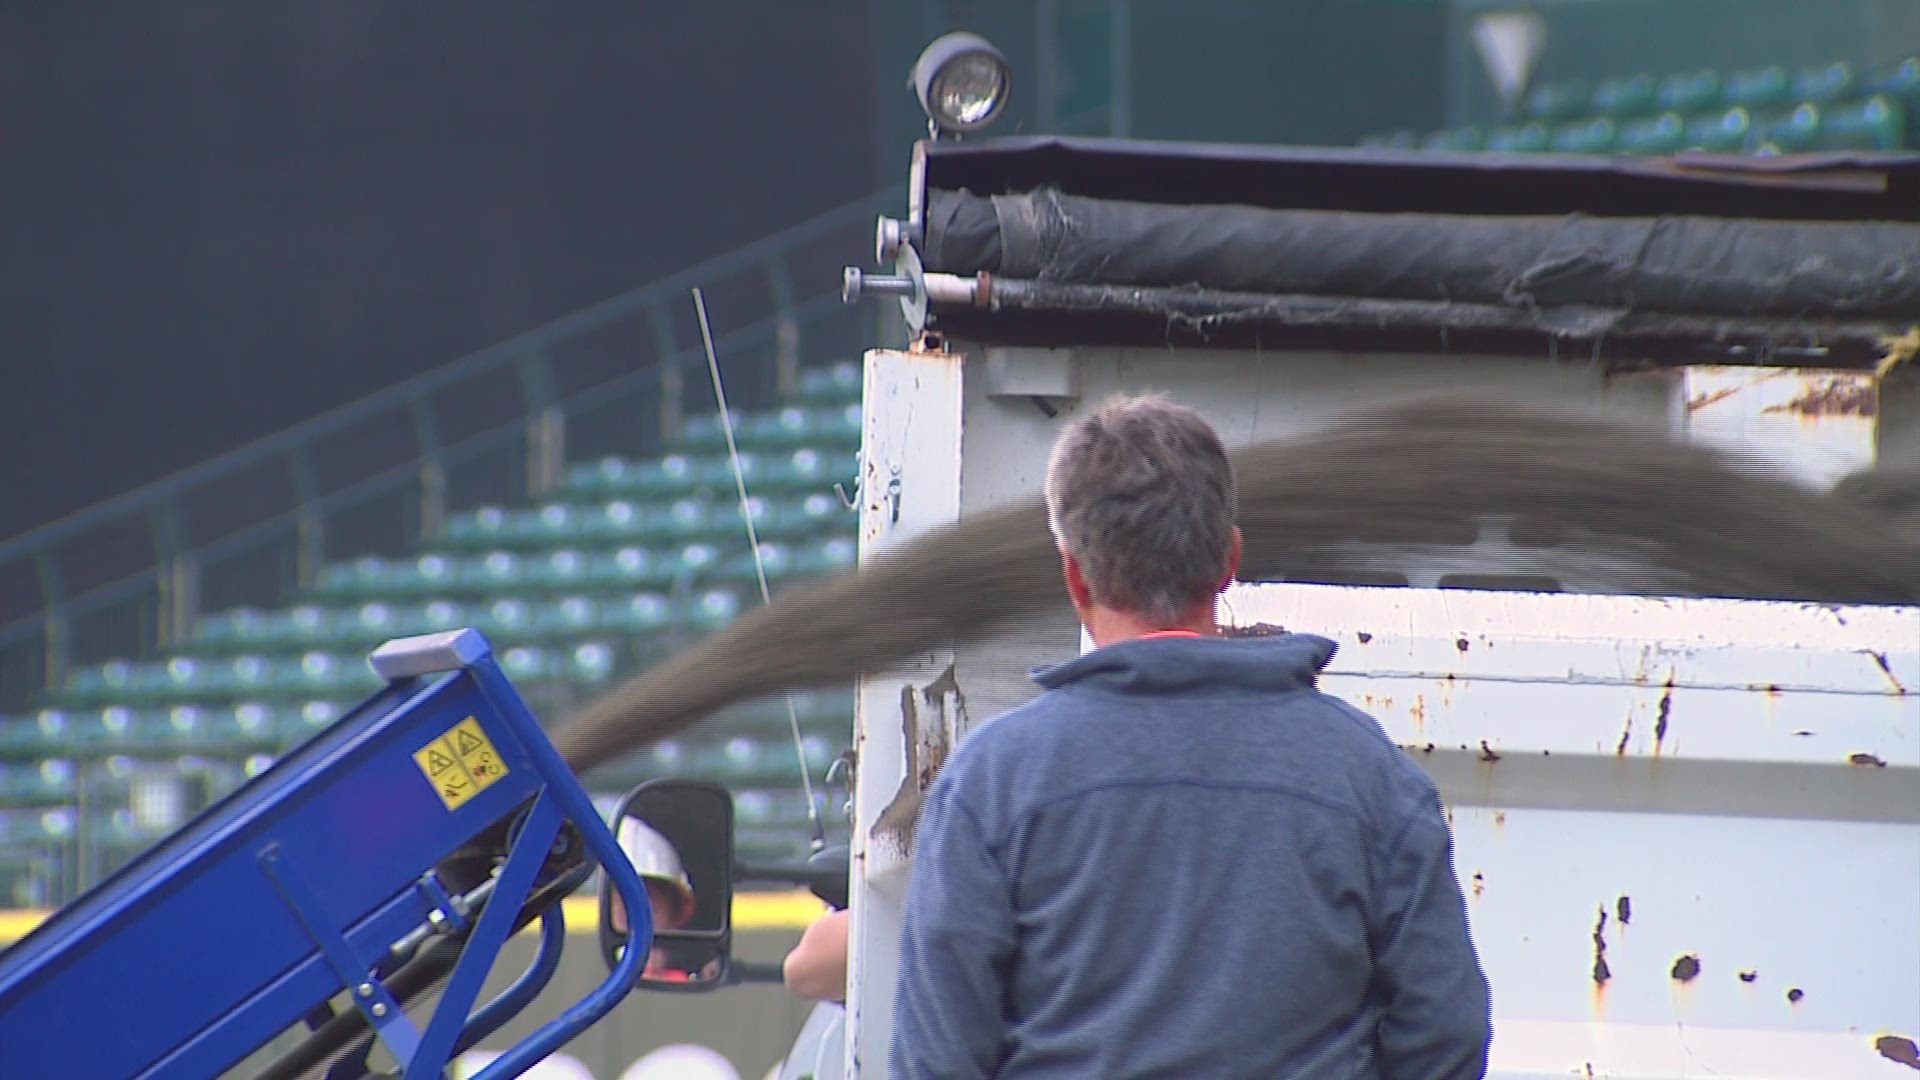 Safeco Field's playing surface was replaced this offseason for the first time in the stadium's 18-year history. This is video from the first day of the change.